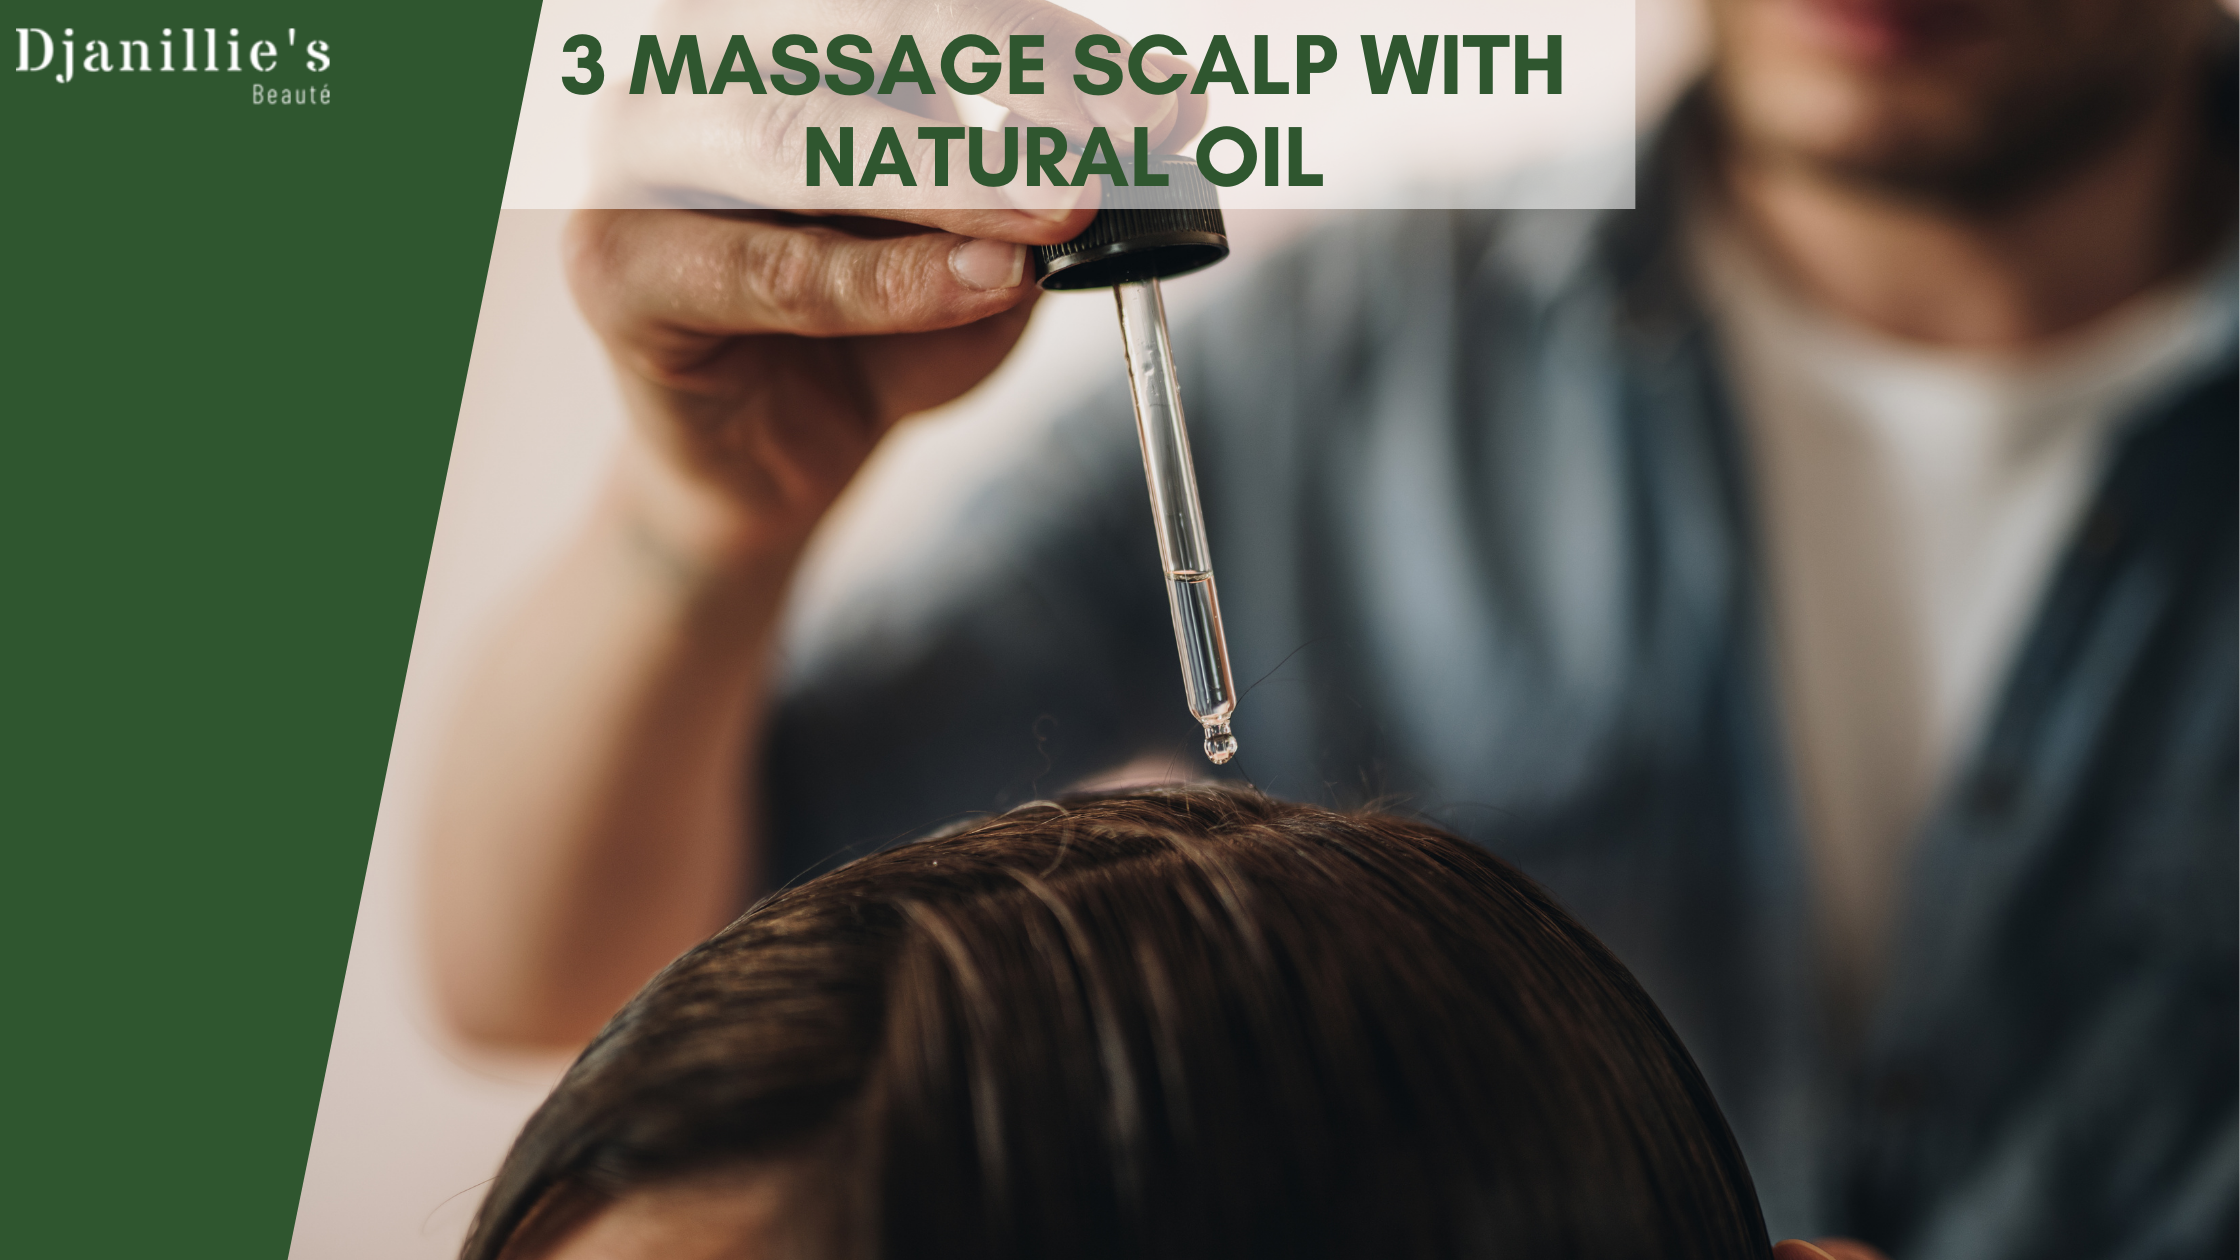 Massage scalp with natural oil